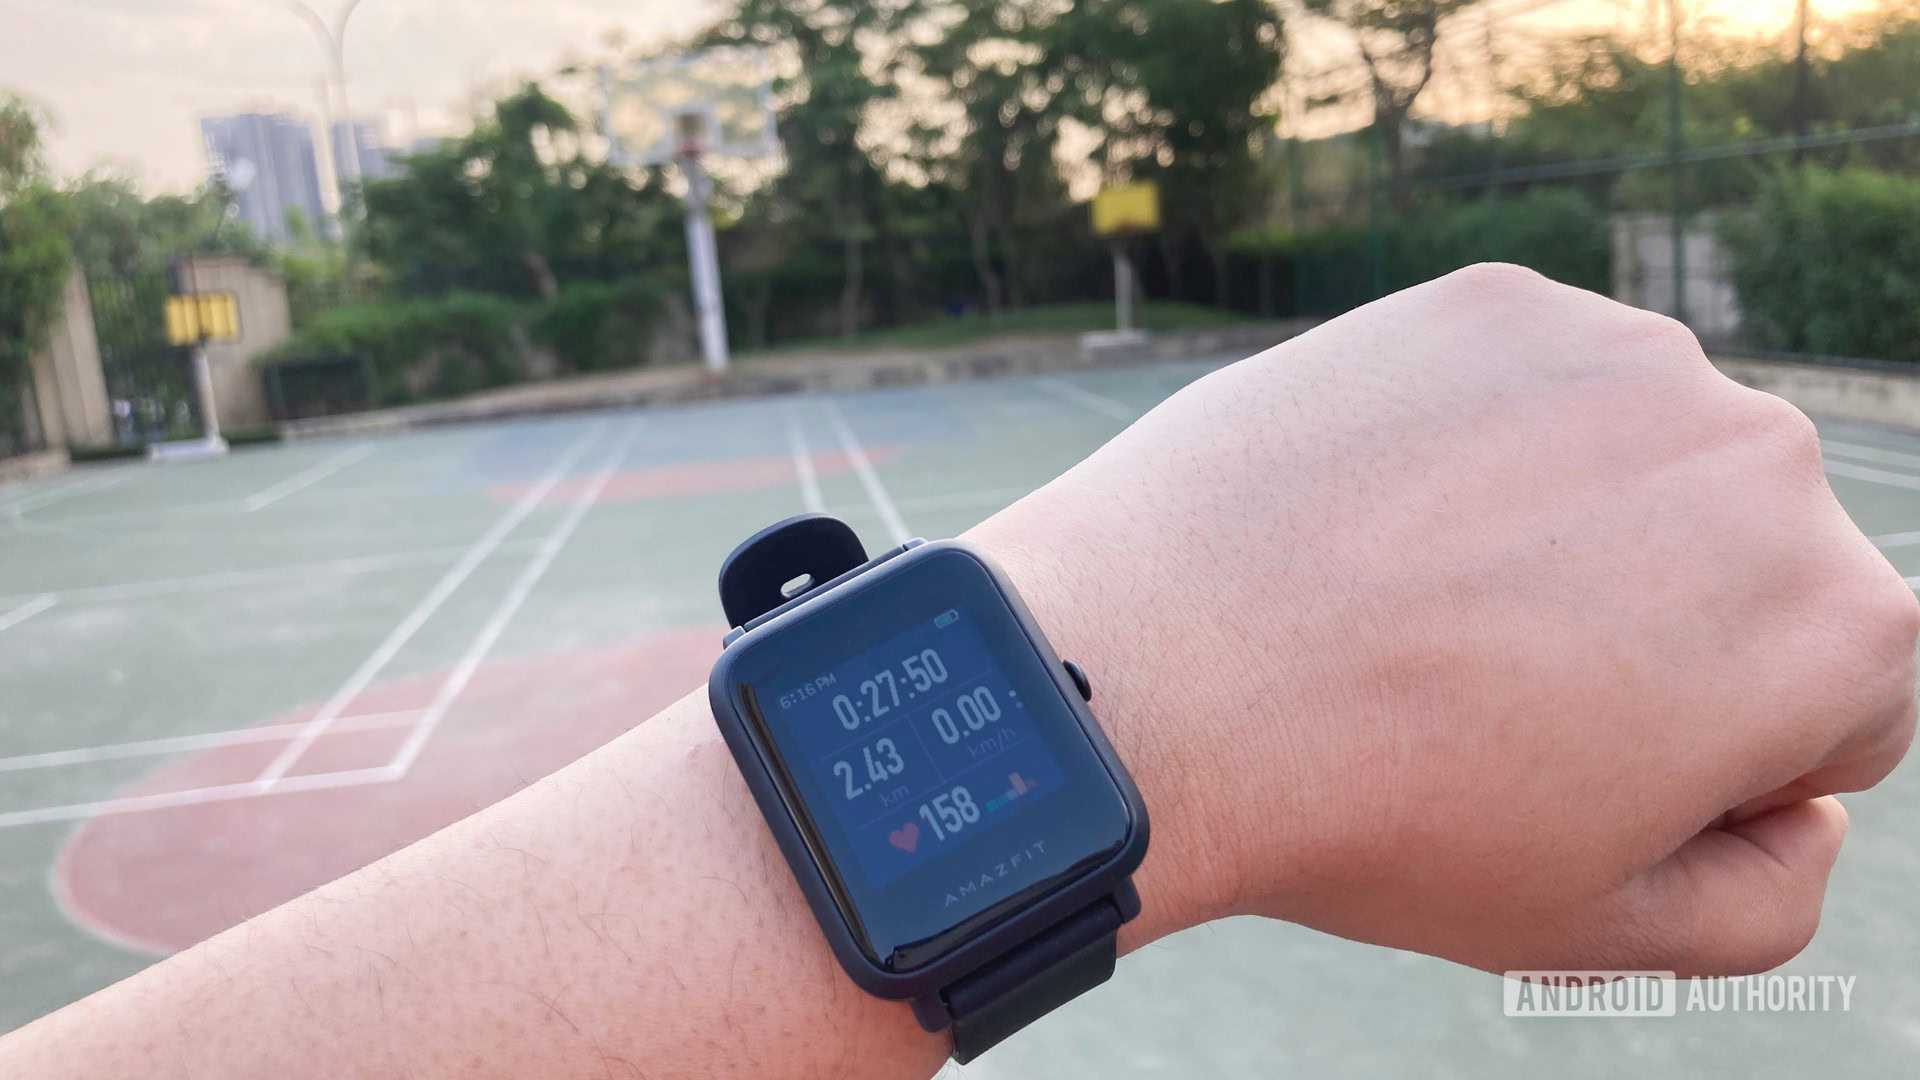 Amazfit Bip S review: A good fitness watch marred by bad connectivity